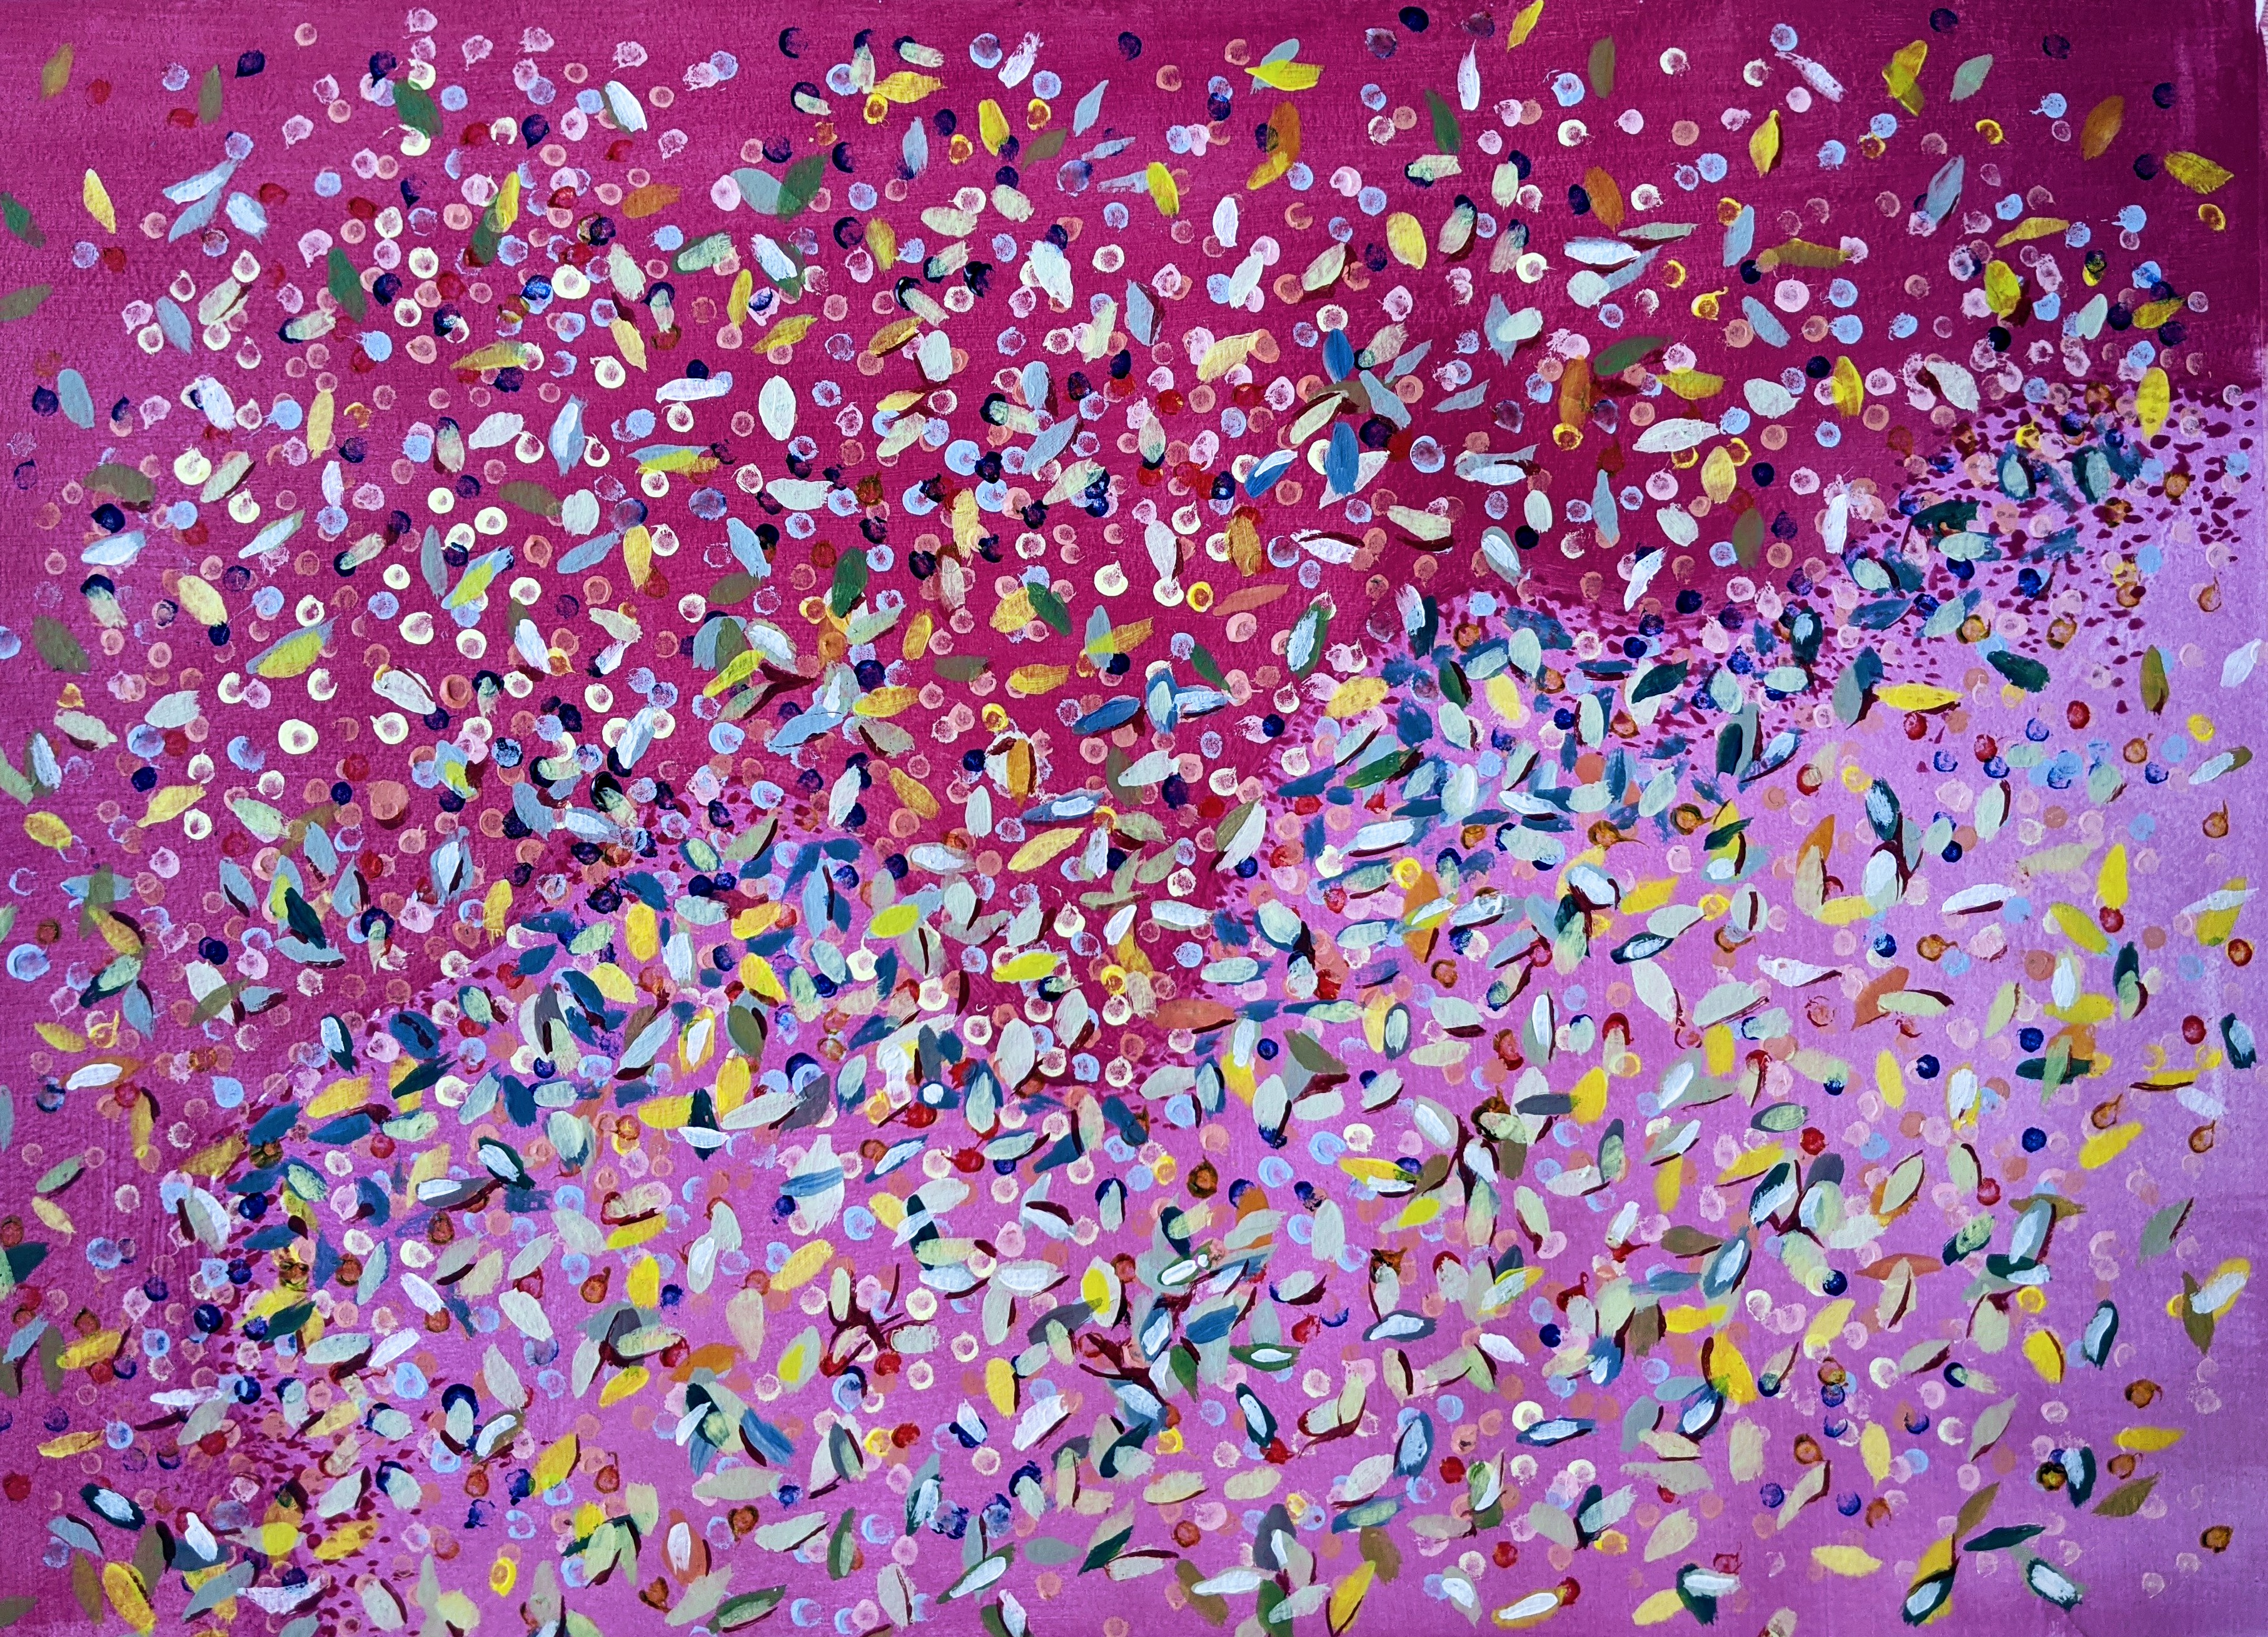 Falling 
Acrylics on paper 
46*34